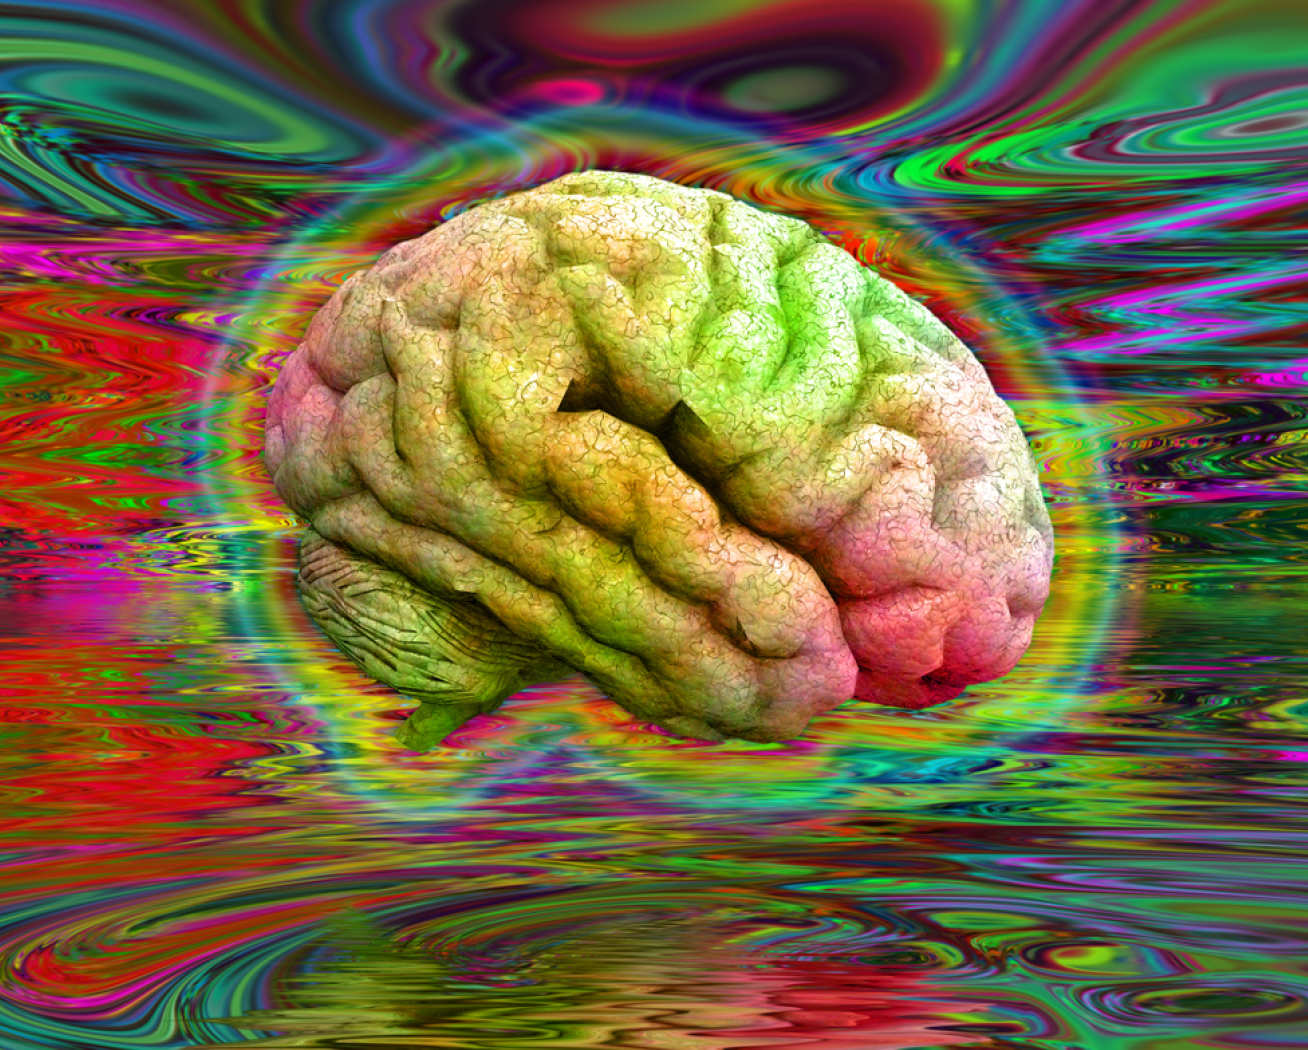 Concept image of brain on psychedelics